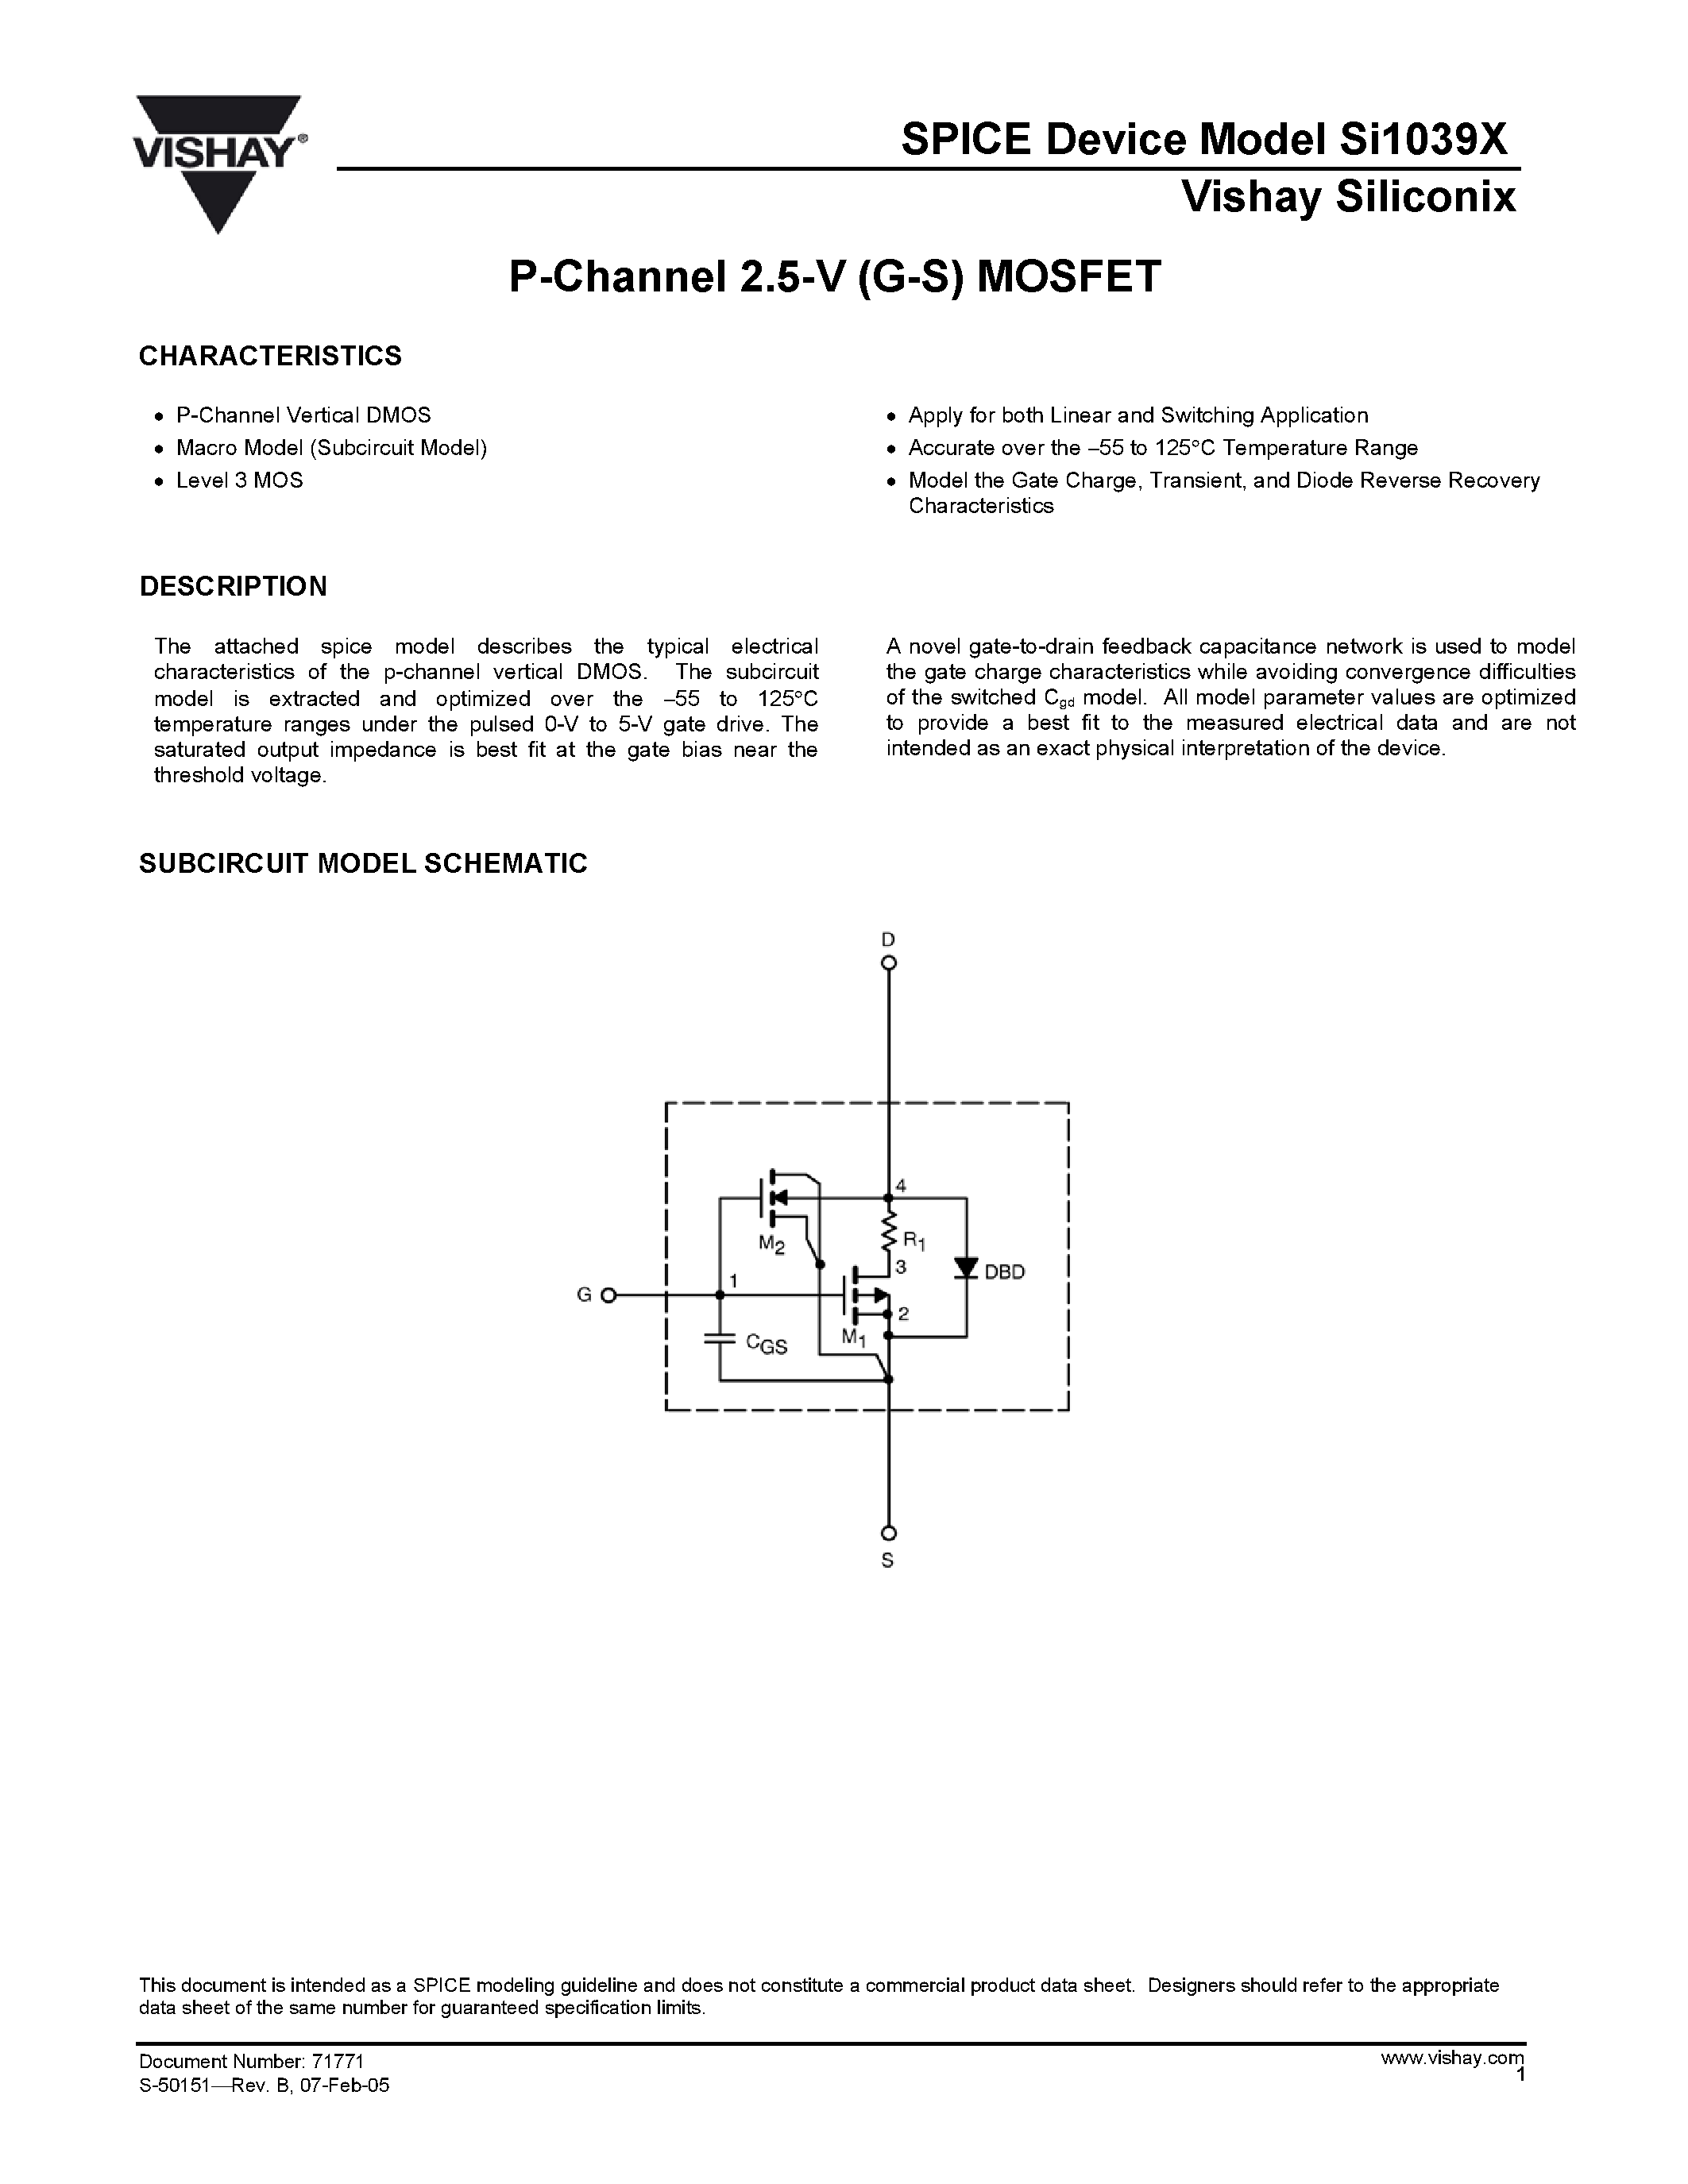 Datasheet Si1039X-T1 - P-Channel 1.8-V (G-S) MOSFET page 1